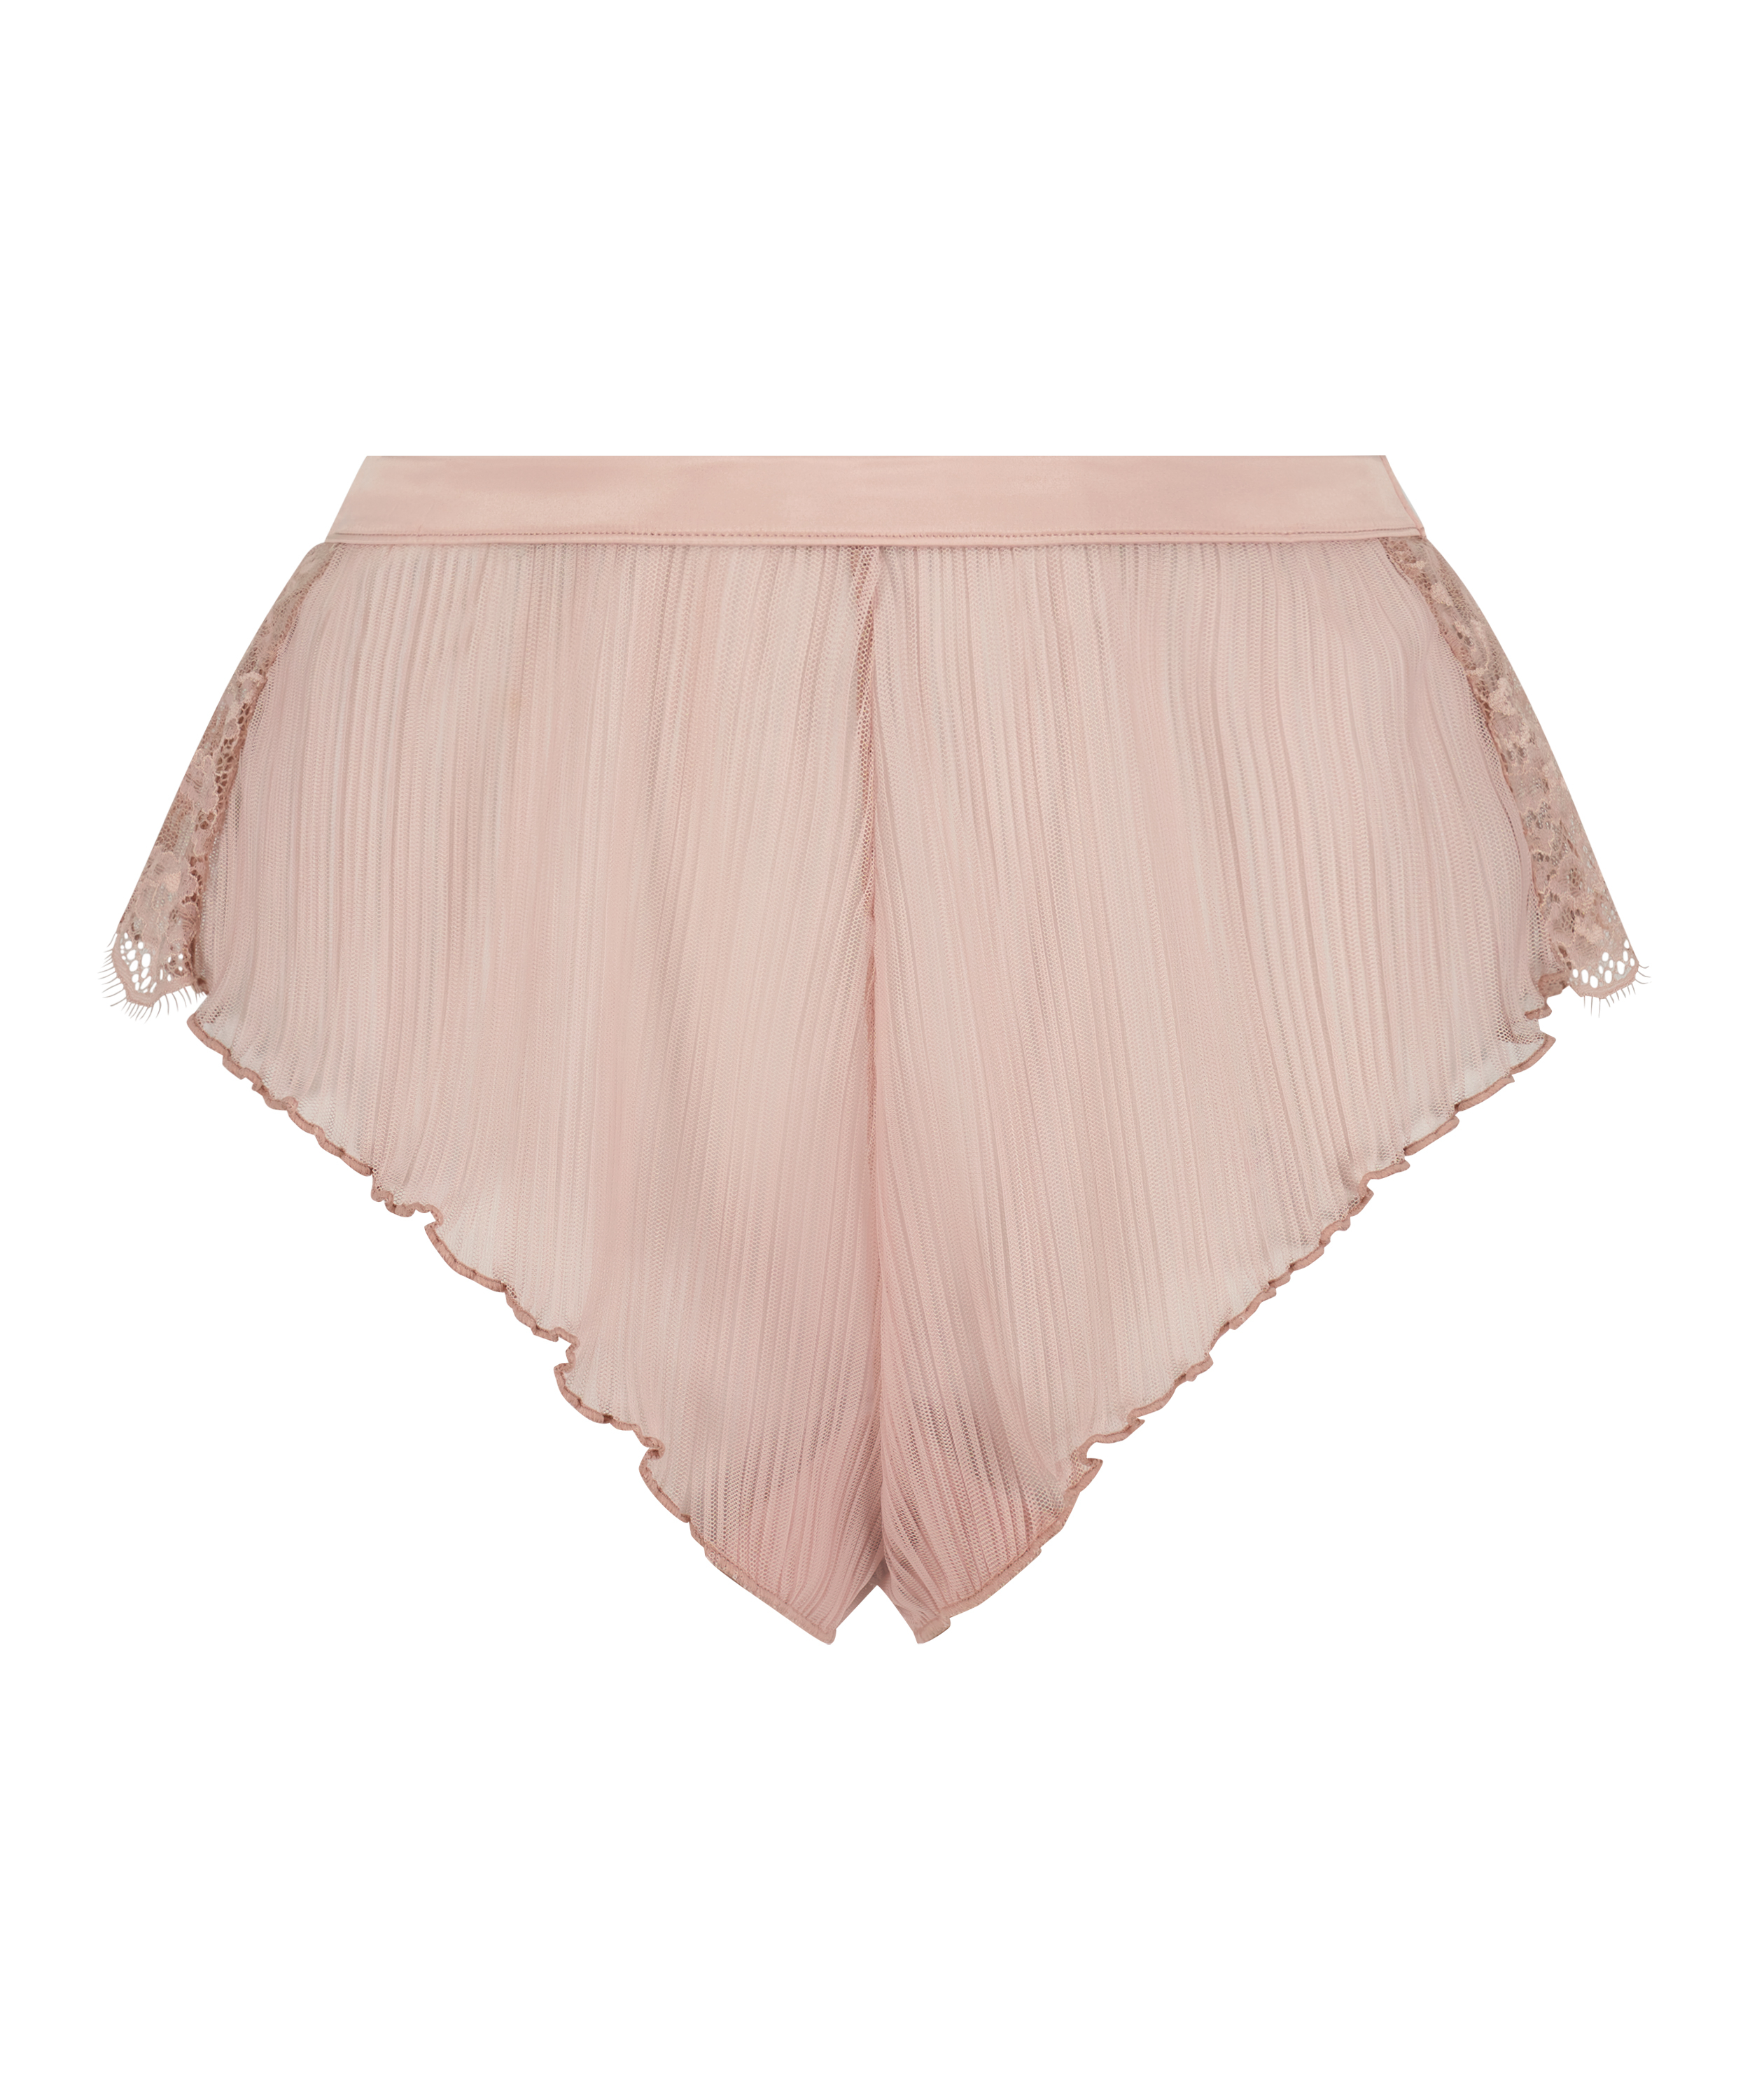 Elissa French Knickers, Pink, main